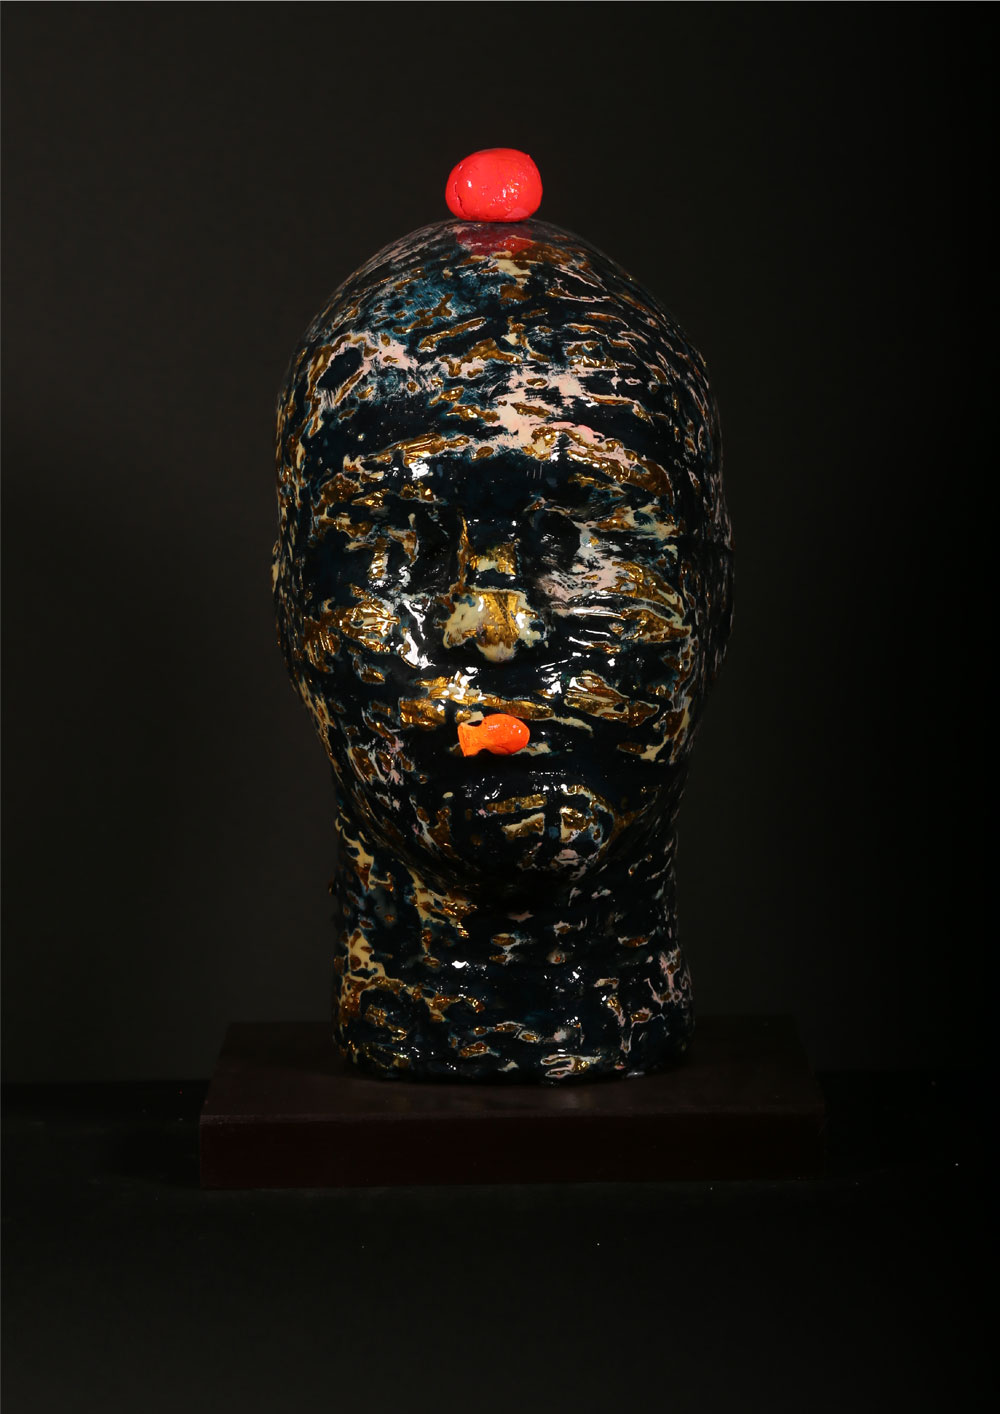 UNTITLED XIV sculpture by Maher Diab